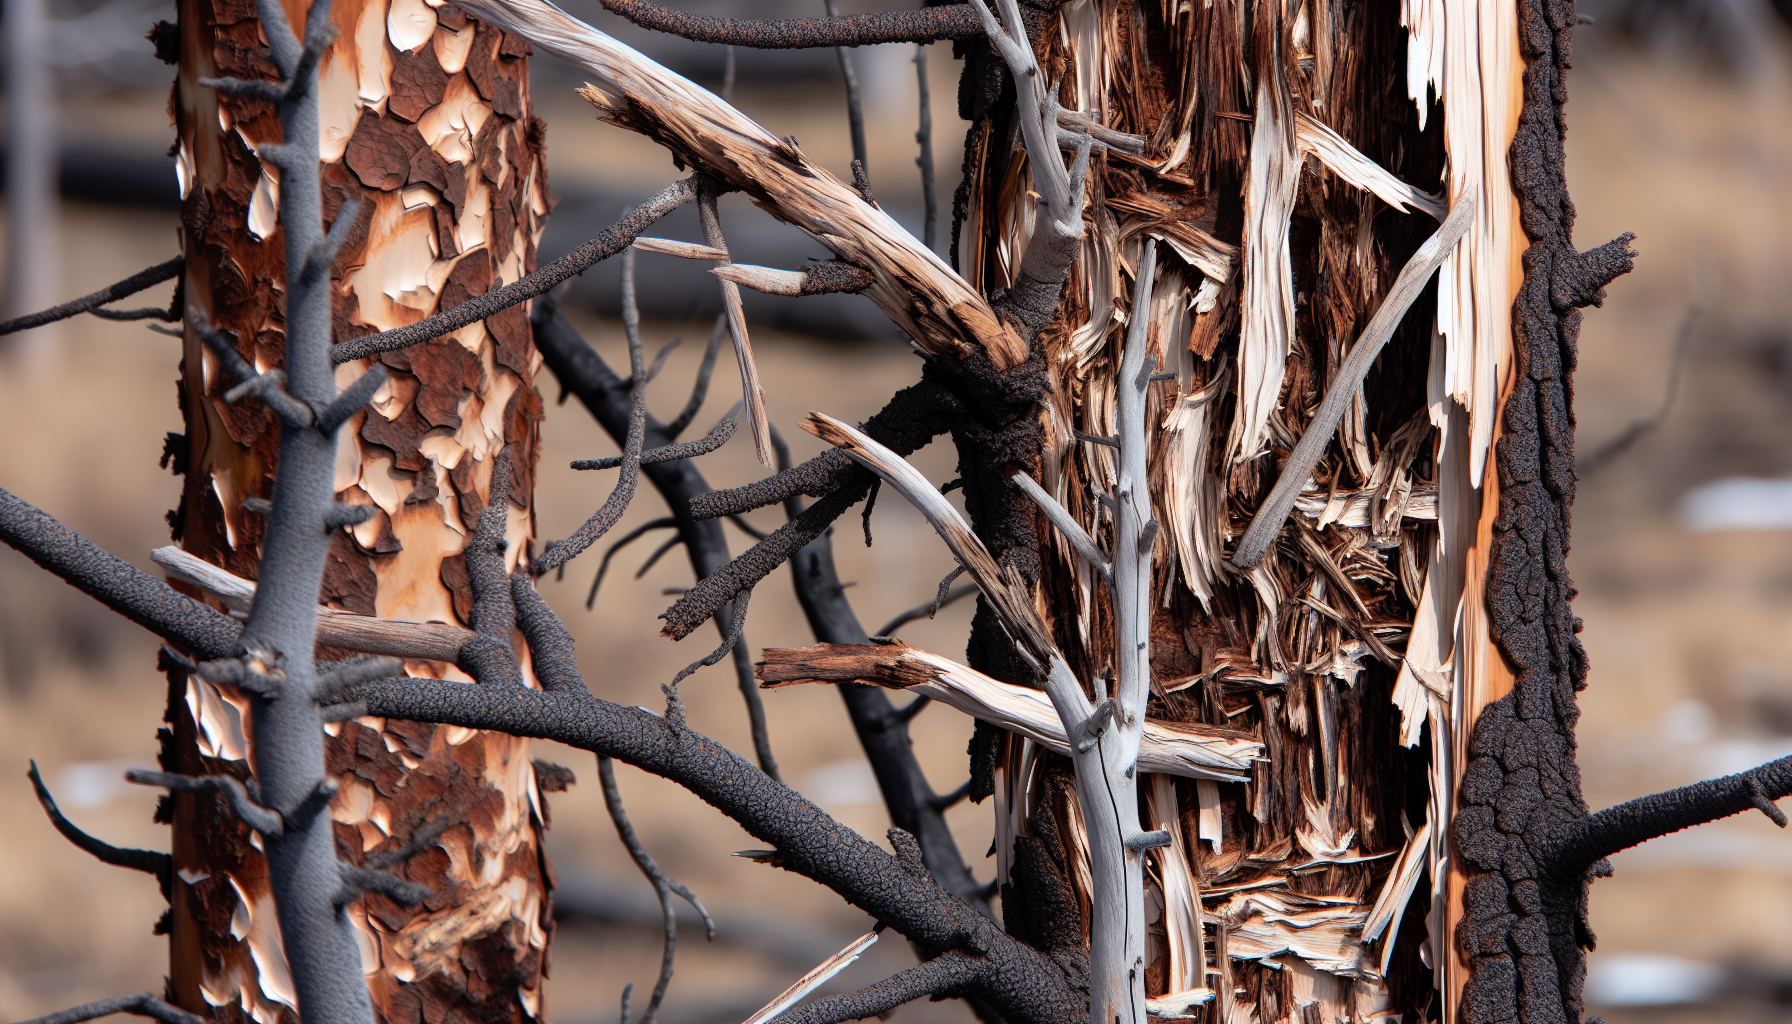 A close-up of tree bark with peeling bark and dead branches